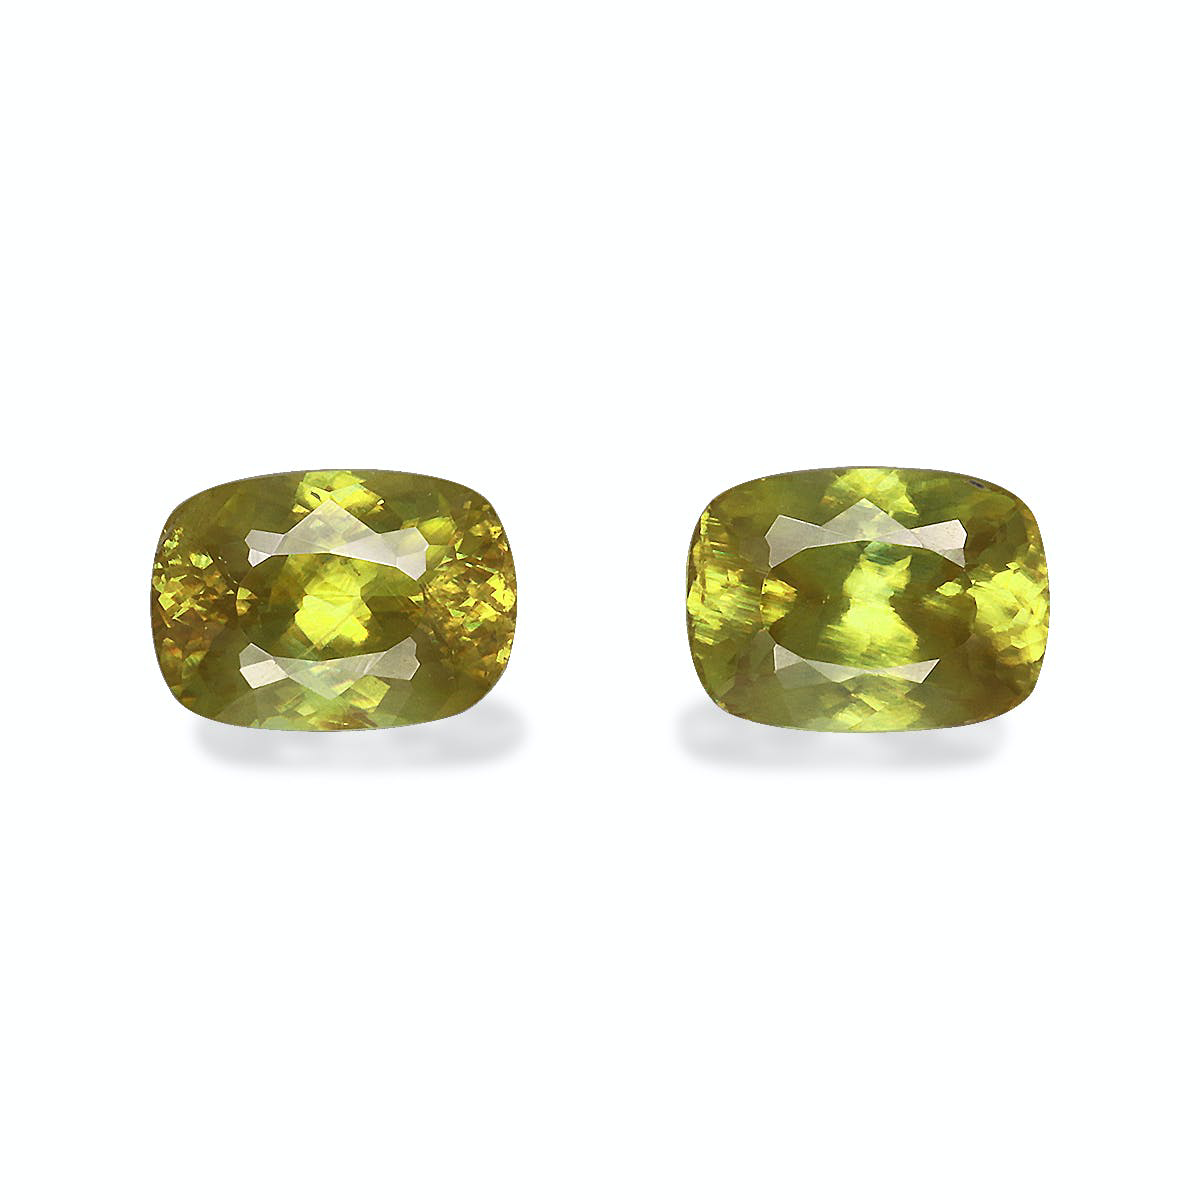 Picture of Lime Green Sphene 2.41ct - 7x5mm Pair (SH0692)